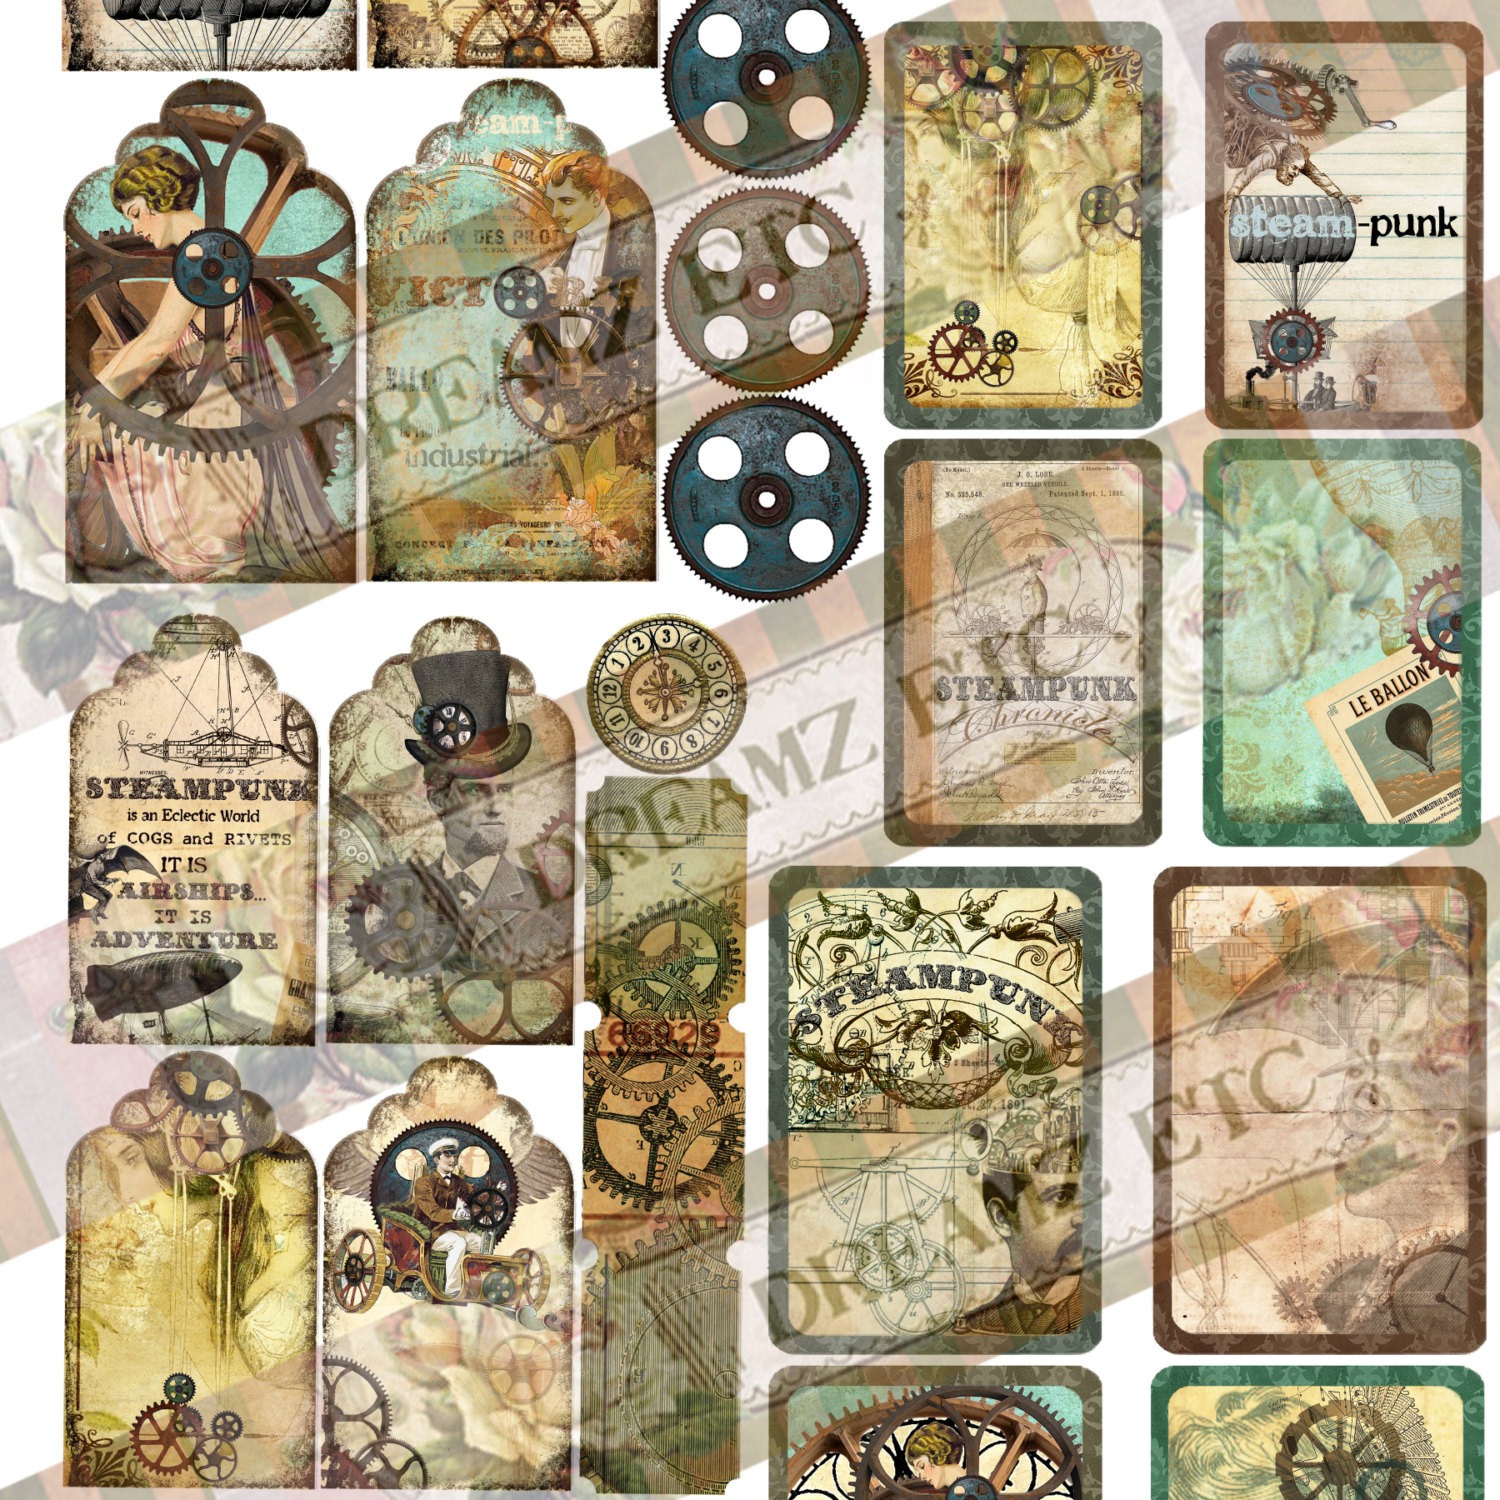 NEW! Digital Kit "STEAMPUNK CHRONICLES Ephemera" - Great for Scrapbooking, Journals, Card Making and Mixed Media Projects steampunk buy now online